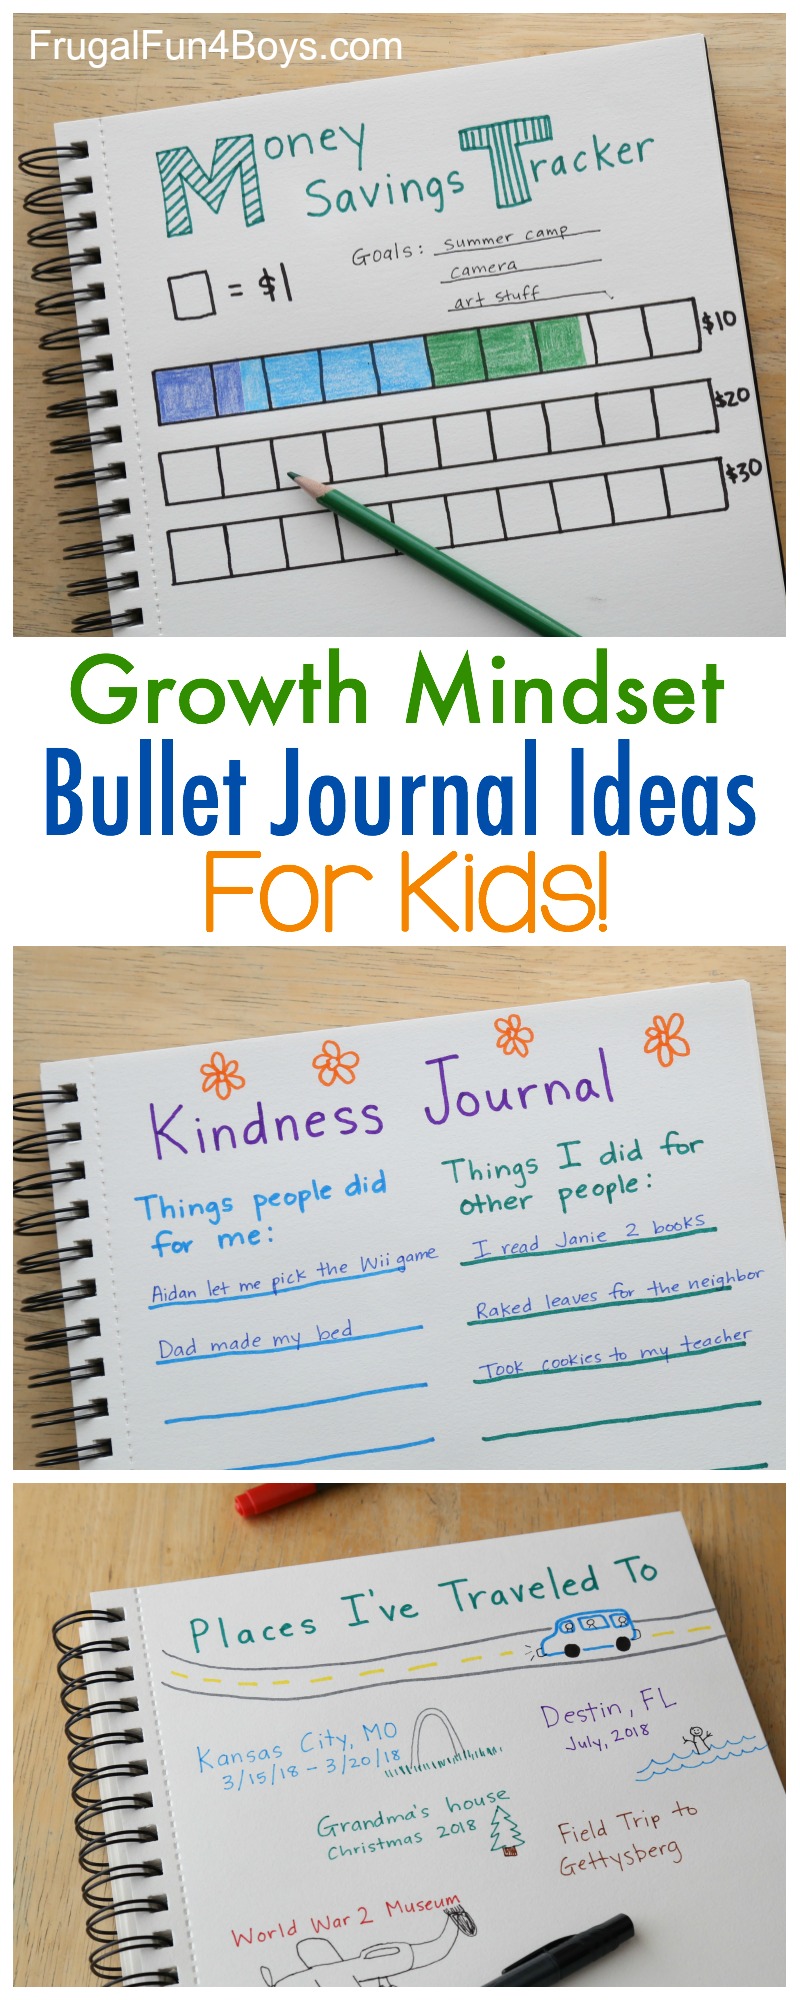 Growth Mindset Bullet Journal Ideas for Kids - Frugal Fun For Boys